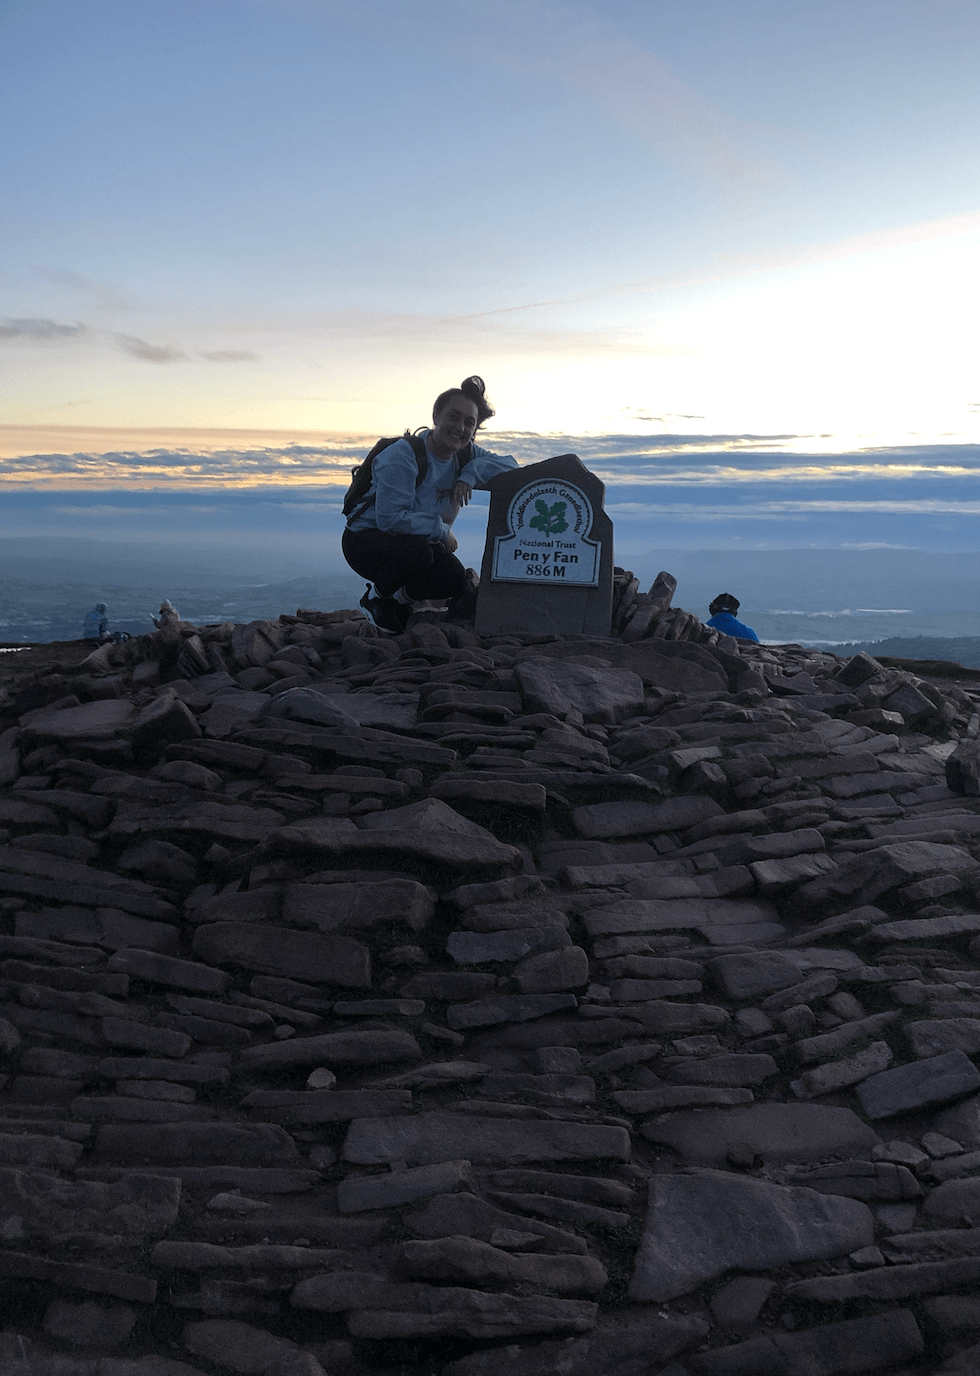 Shireen kneeling next to the Pen Y Fan National Trust sign with sun rising in back